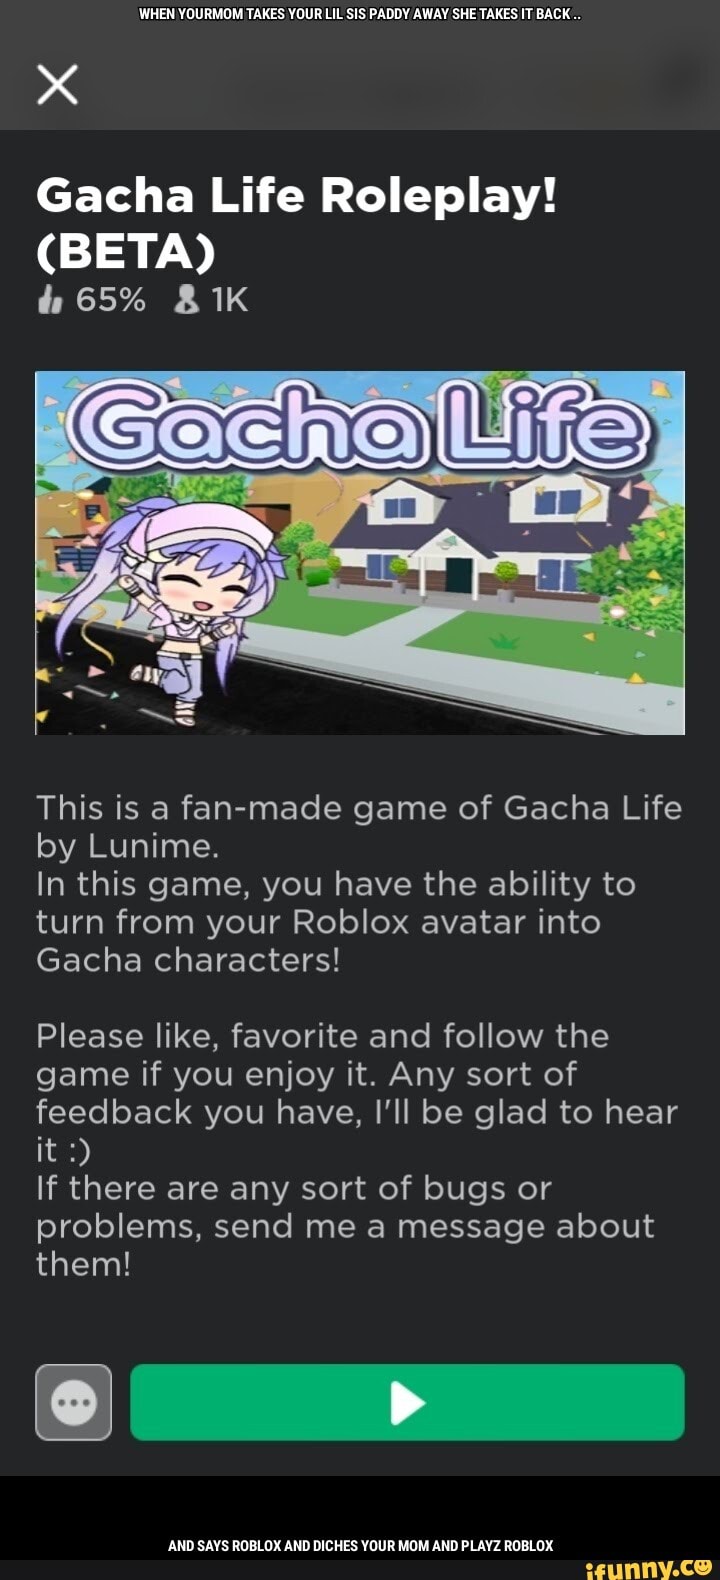 When Yourmom Takes Your Lil Sis Paddy Away She Takes It Back Gacha Life Roleplay Beta 465 This Is A Fan Made Game Of Gacha Life By Lunime In This Game You Have - moskau roblox piano